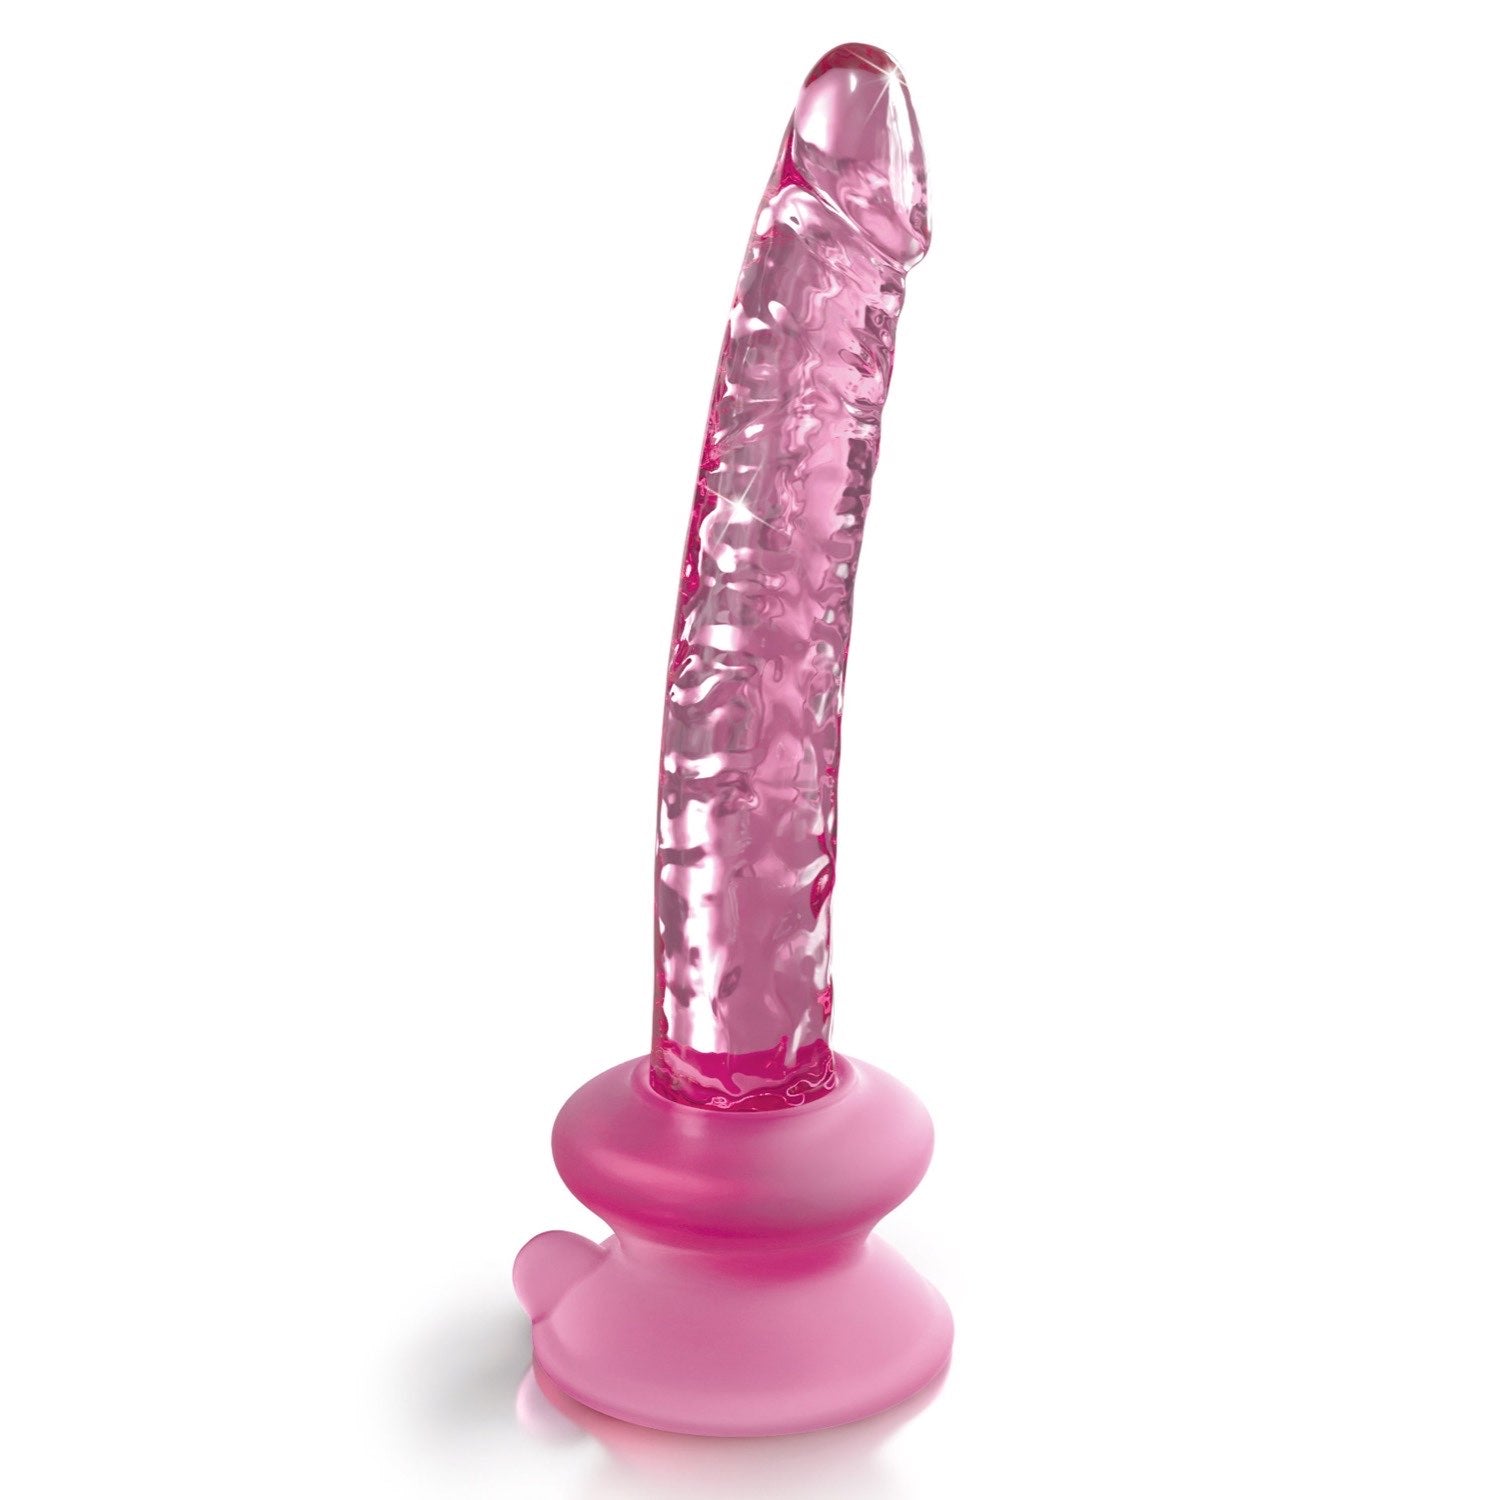 Icicles No. 86 - Pink 17 cm Glass Dong with Suction Base by Pipedream